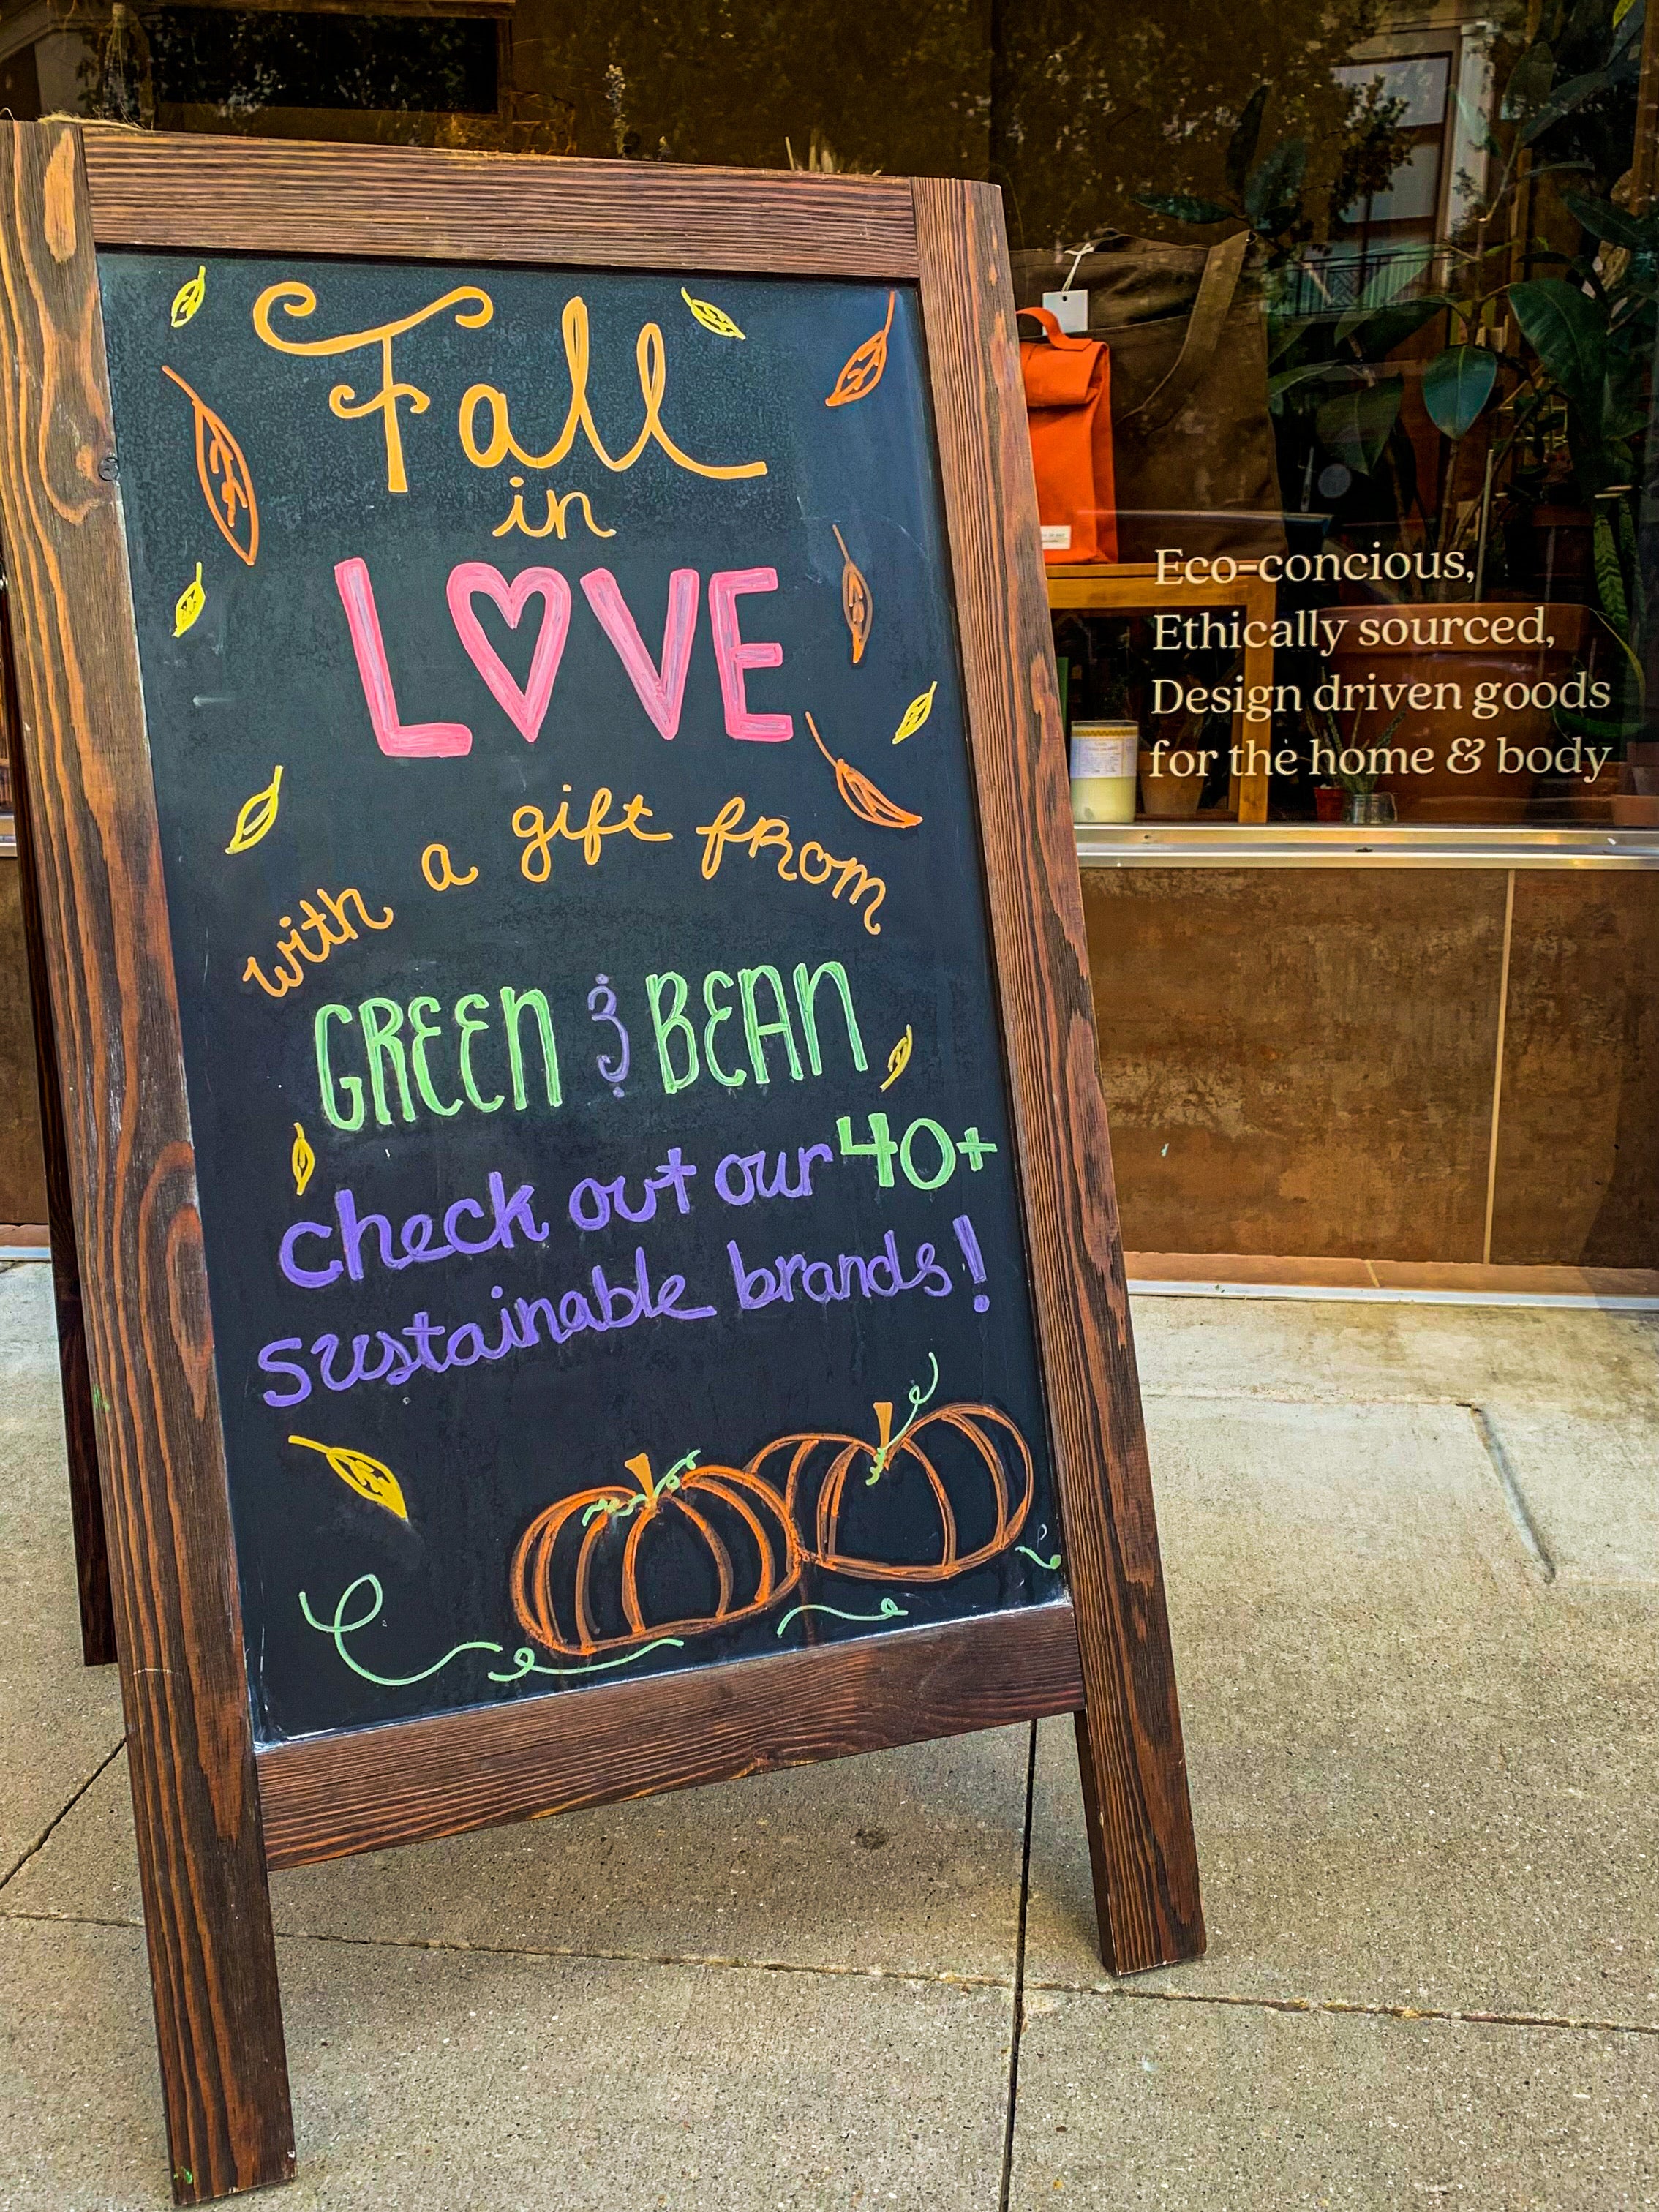 Retail shop sidewalk sign that says "Fall in love with a gift from Green & Bean: check out our 40+ sustainable brands!"